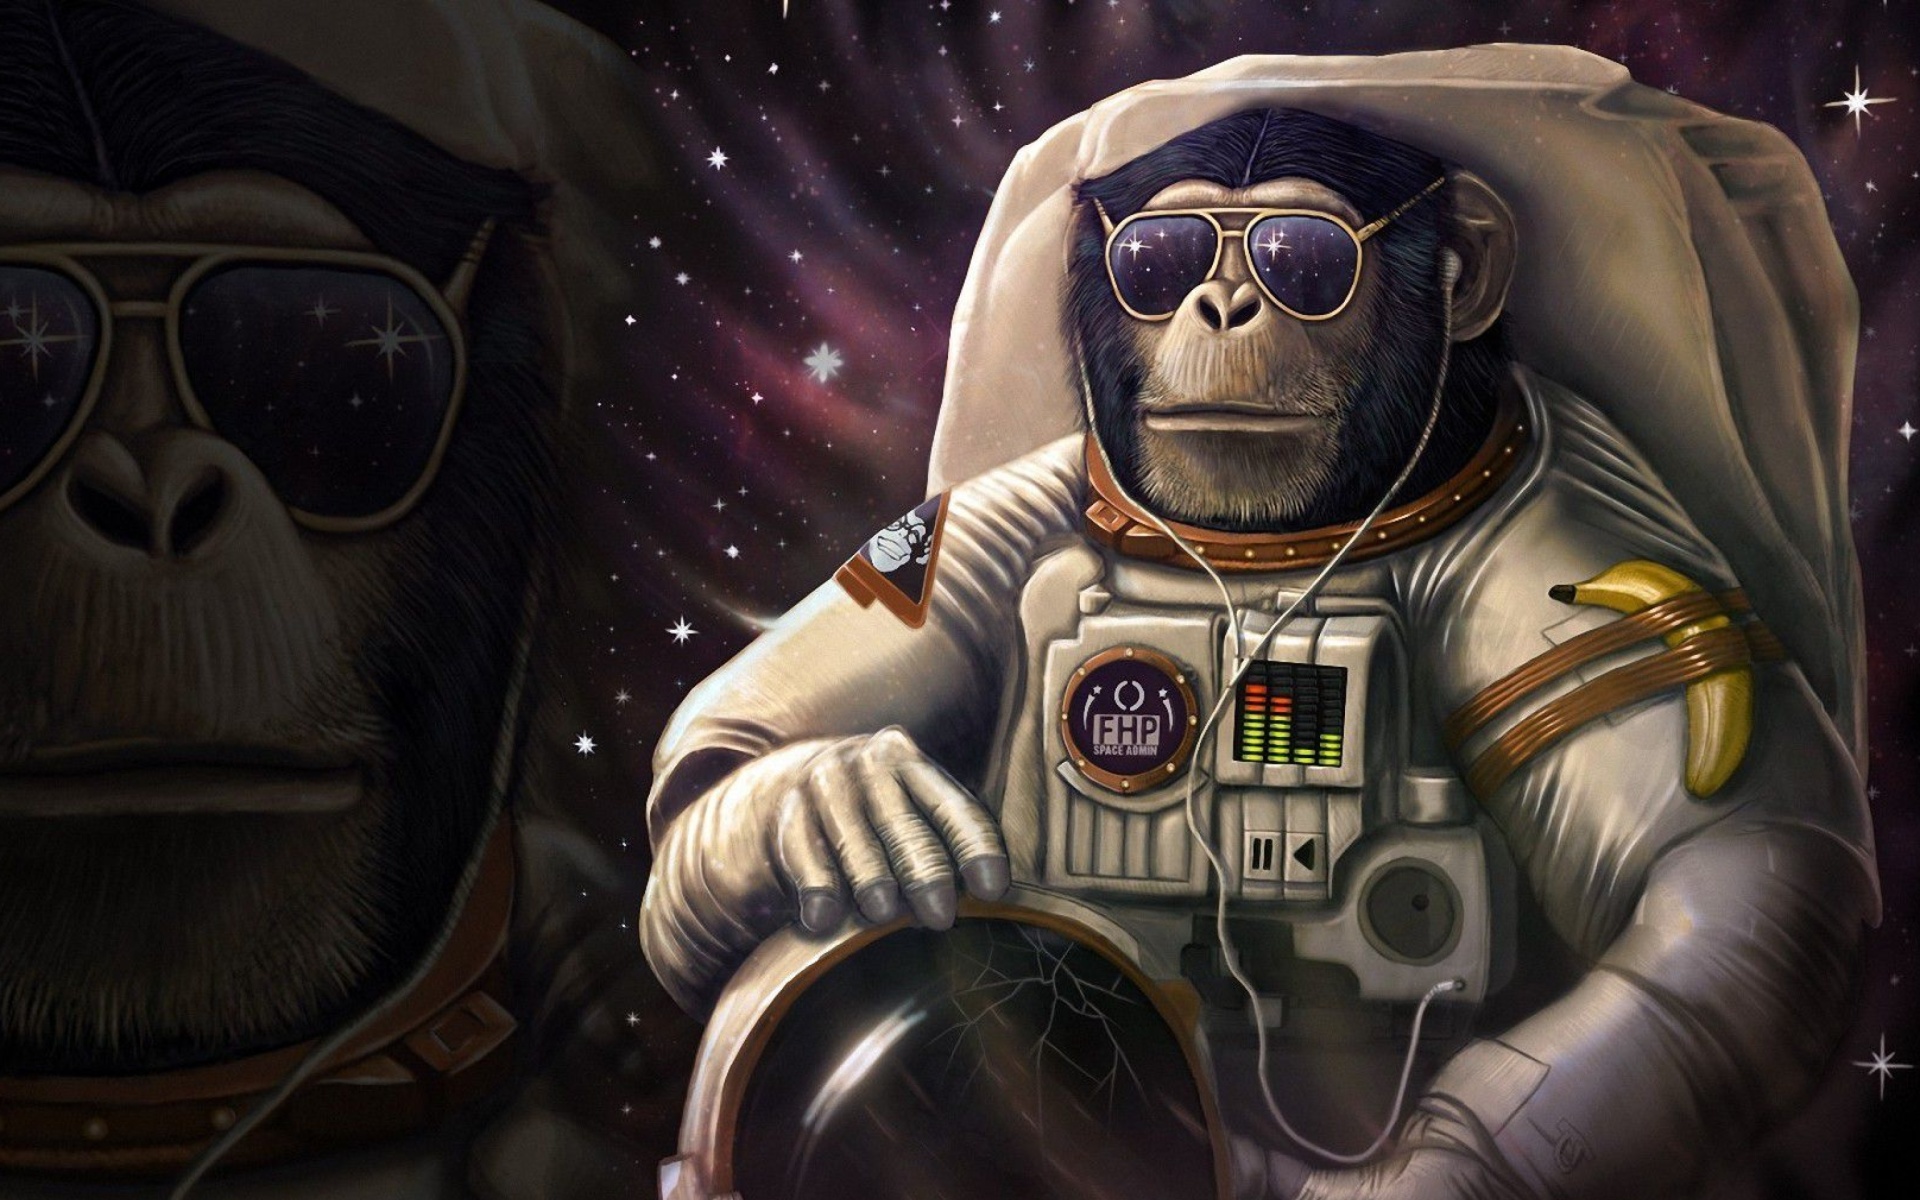 Monkeys and apes in space wallpaper 1920x1200